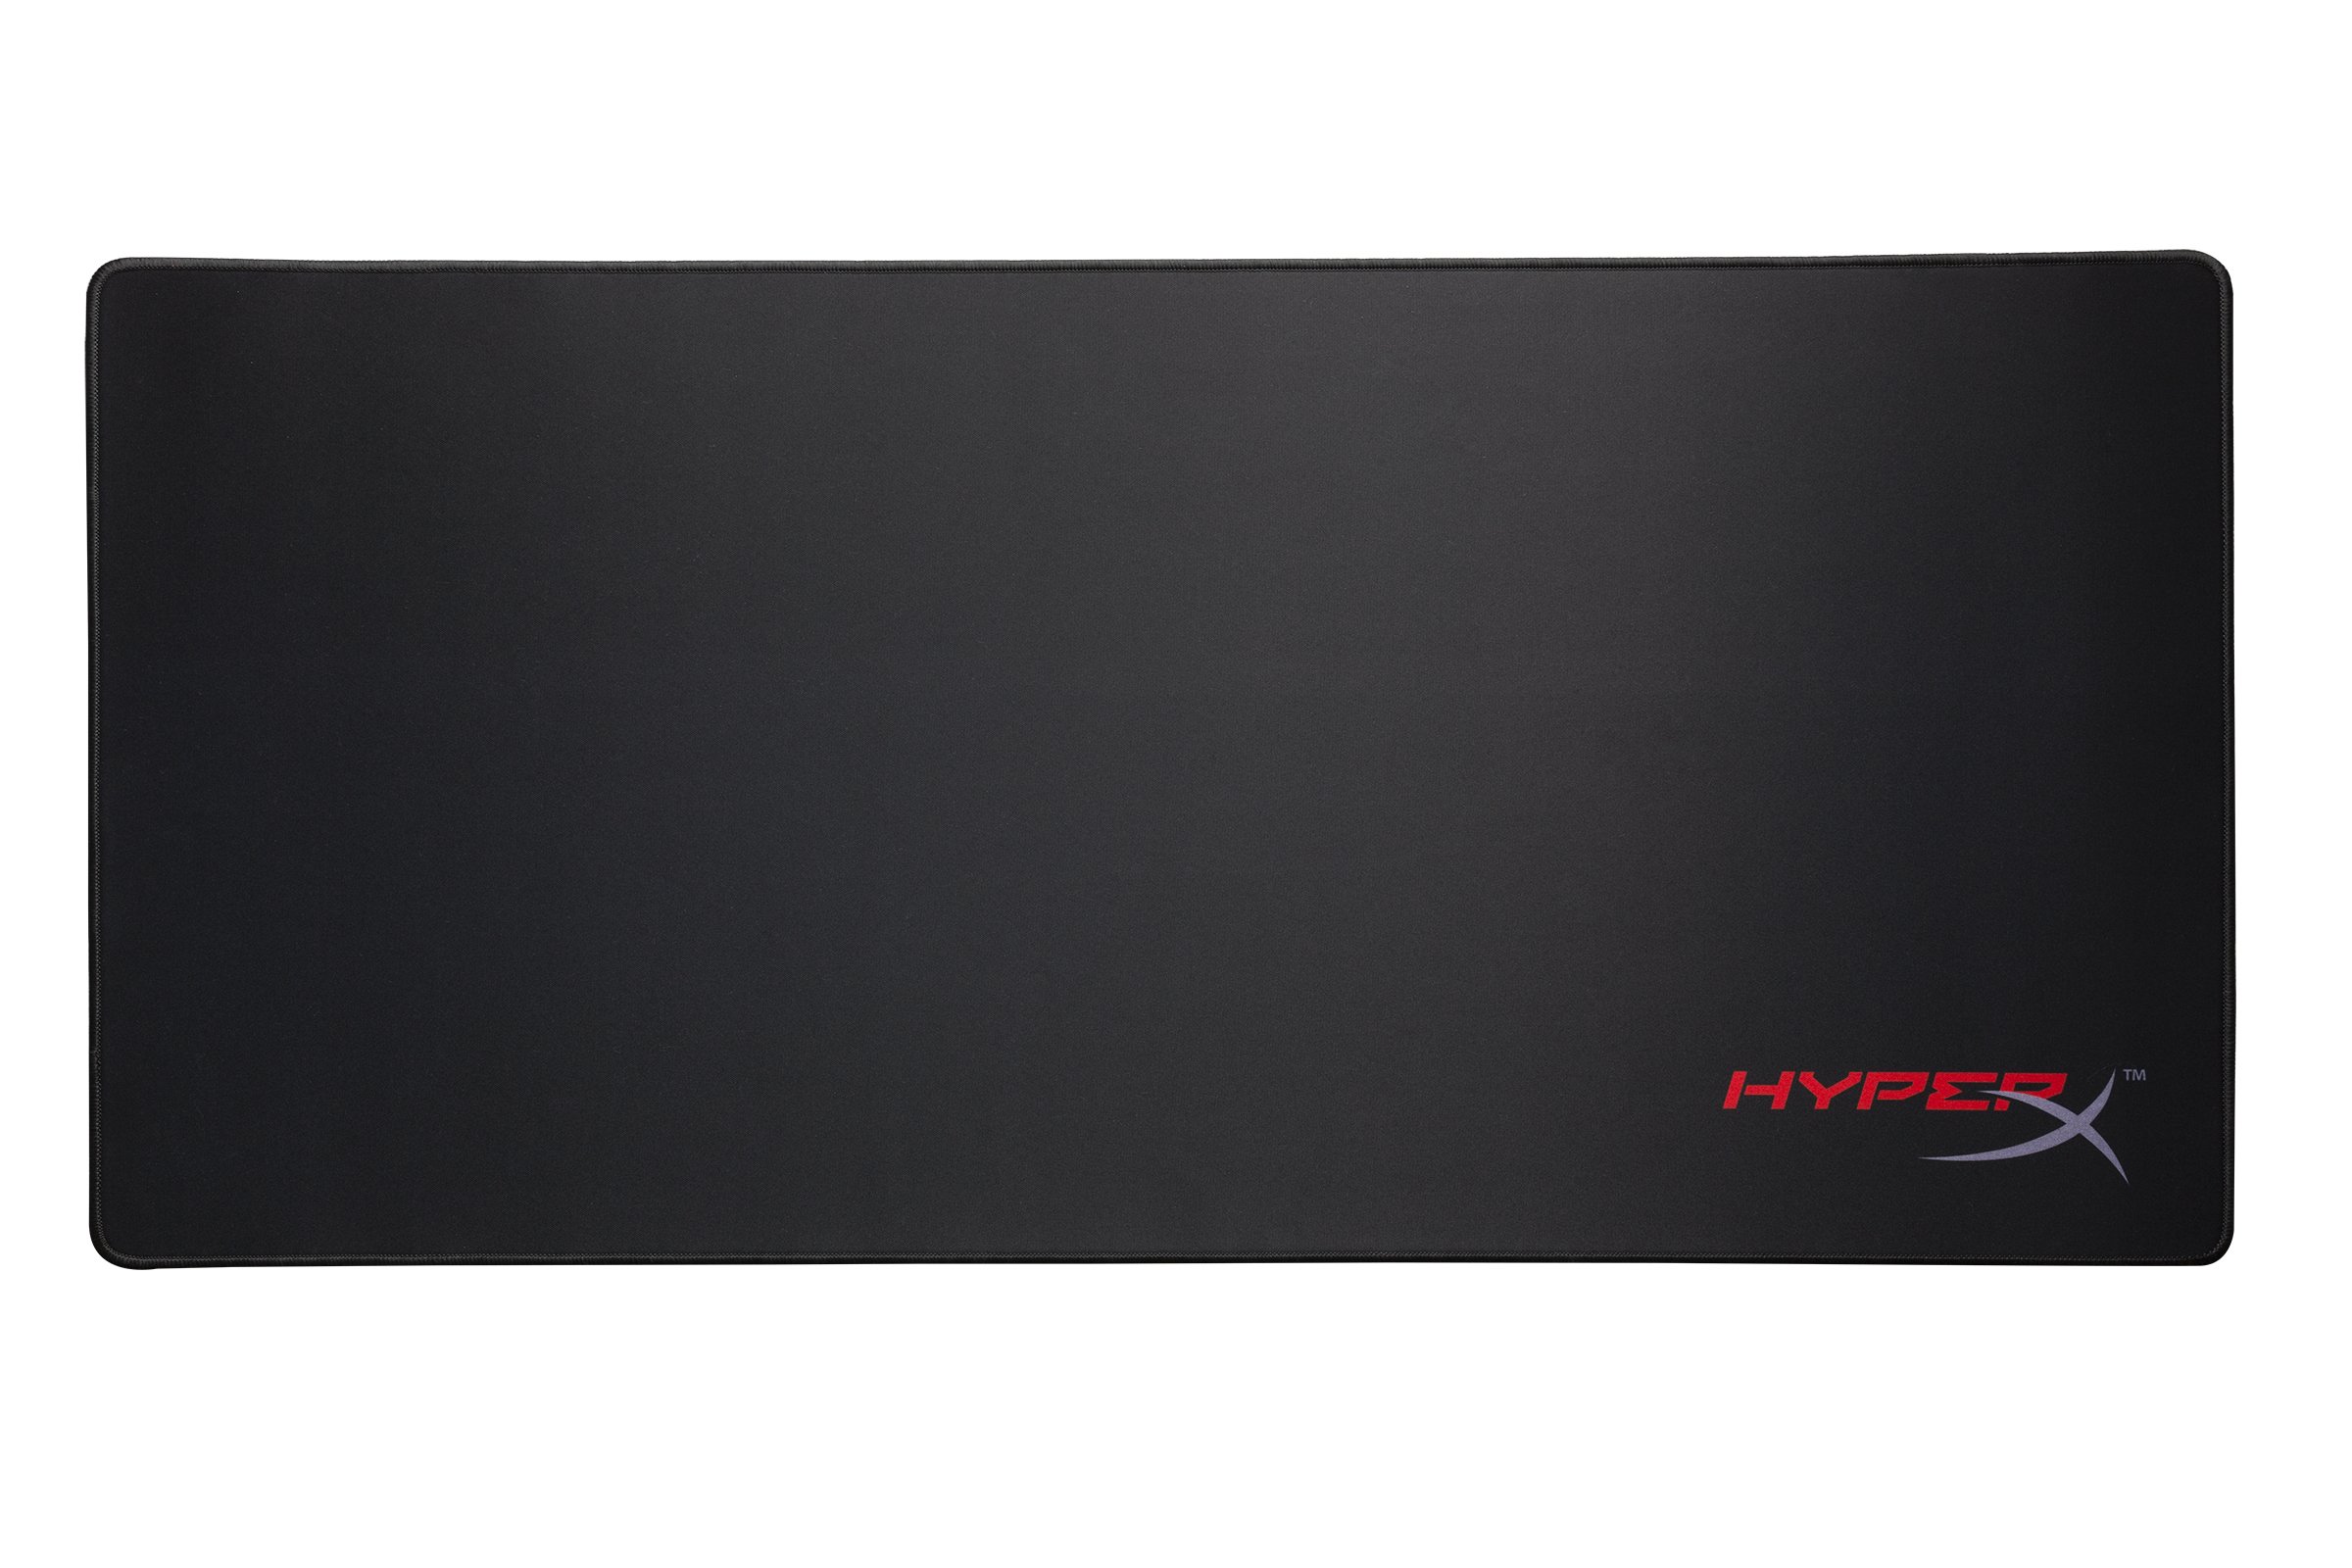 HyperX Fury S - Pro Gaming Mouse Pad, Cloth Surface Optimized for Precision, Stitched Anti-Fray Edges, X-Large 900x420x4mm